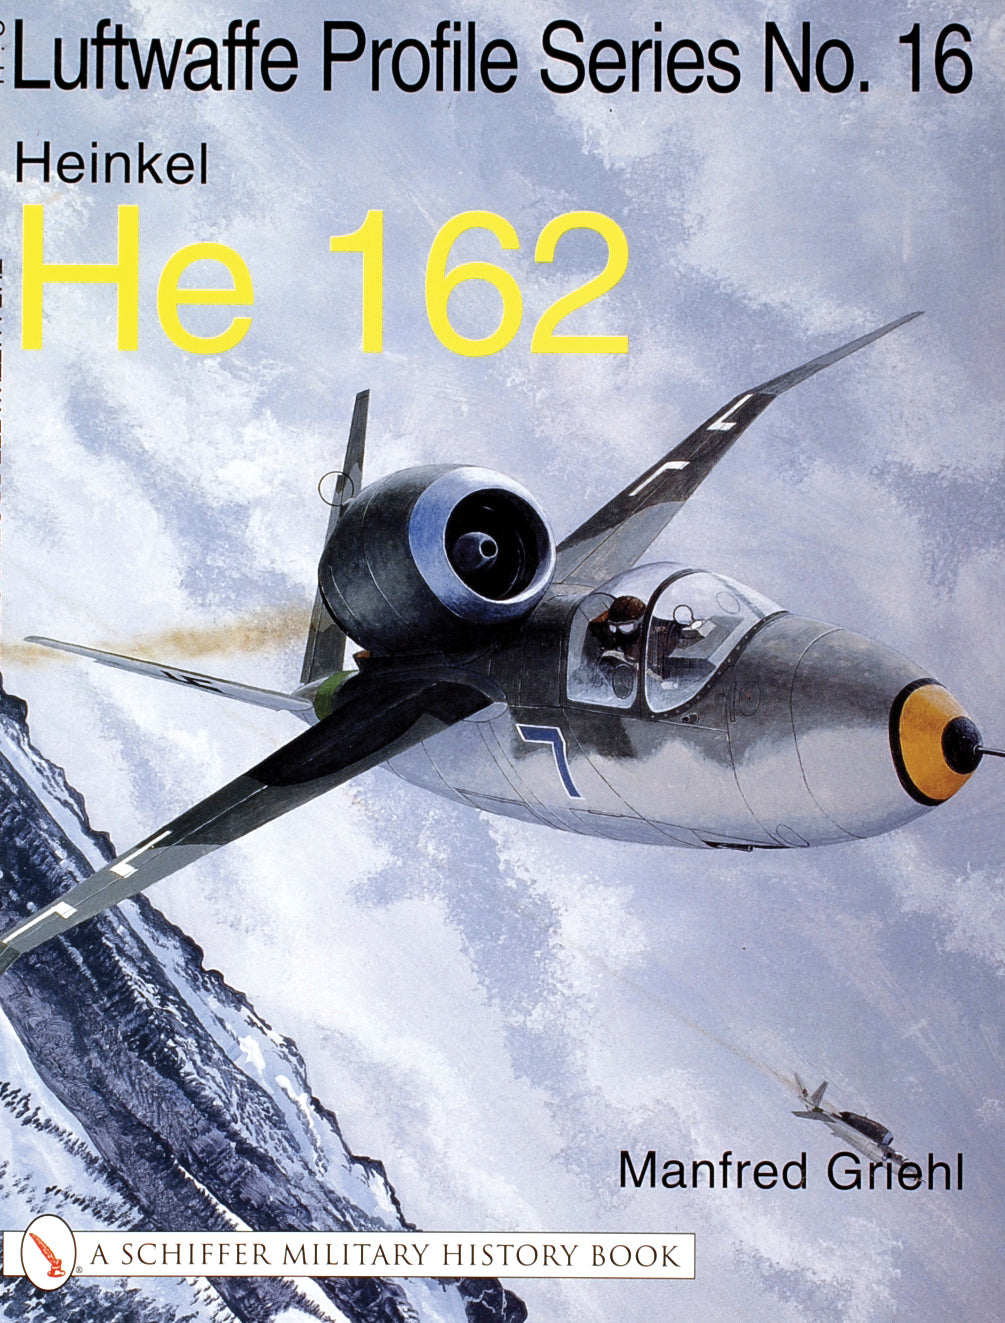 The Luftwaffe Profile Series No.16